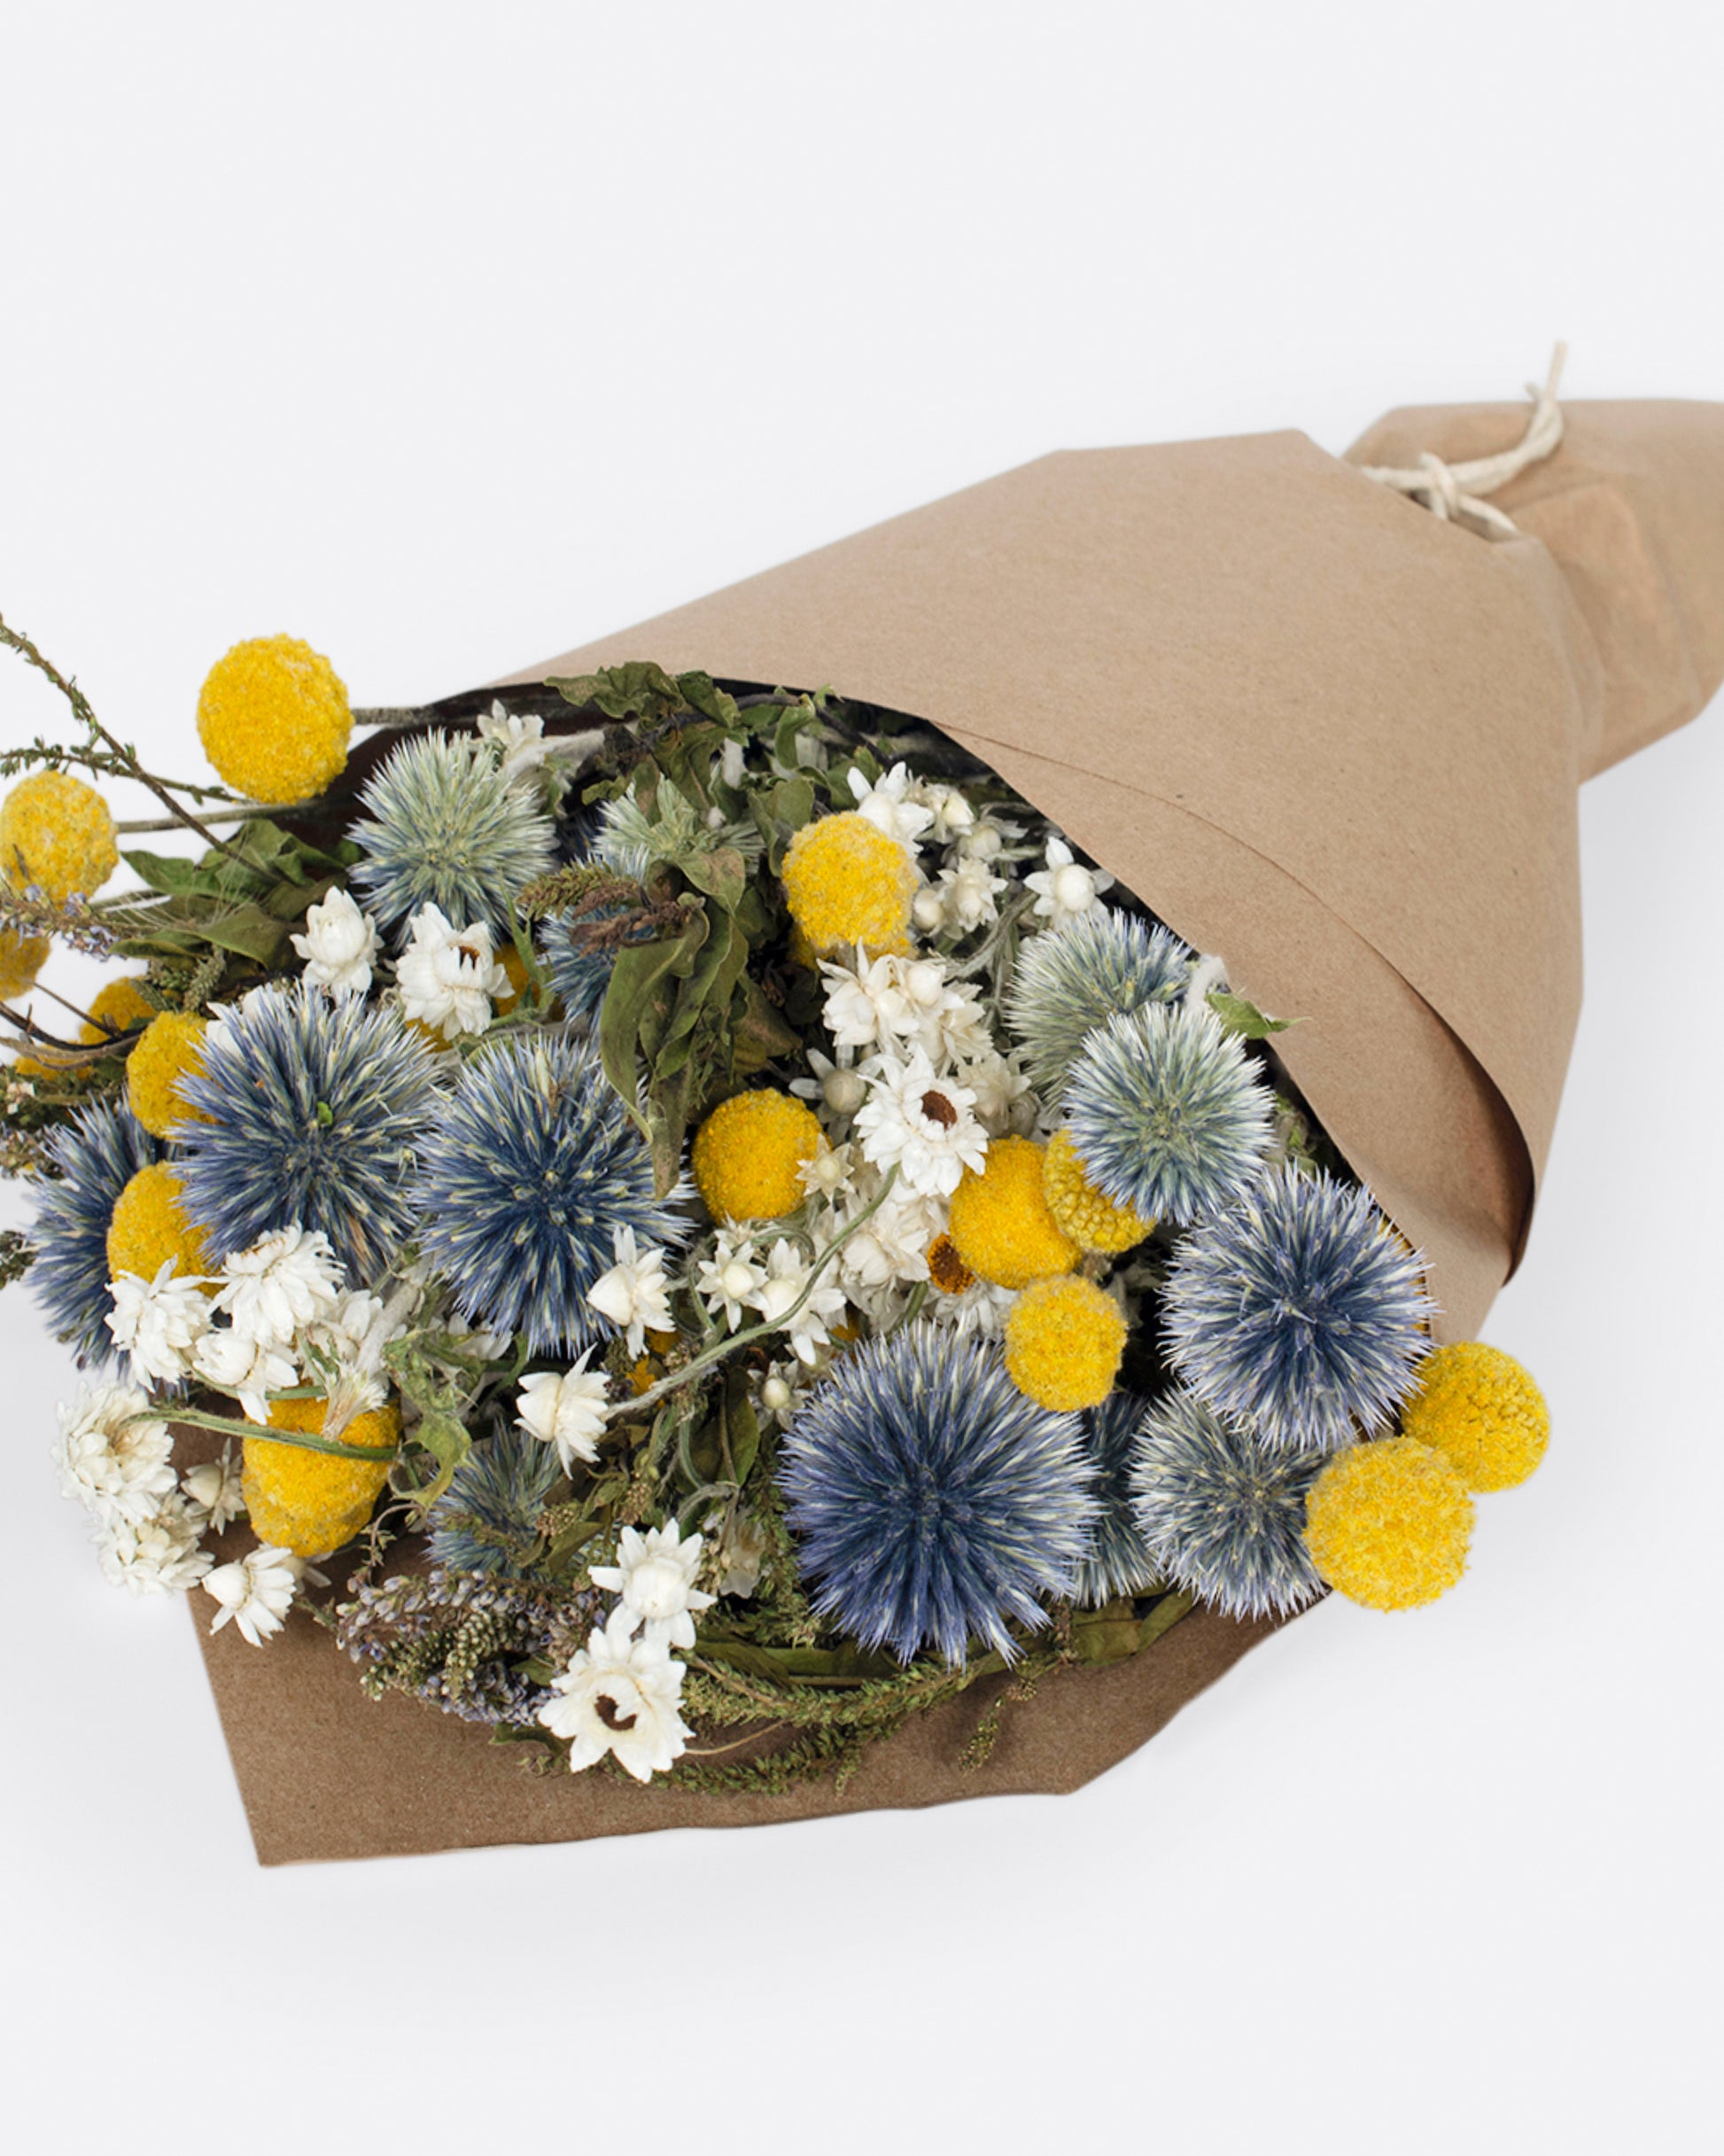 A hand arranged bouquet with assorted shades of yellow, green, and blue.